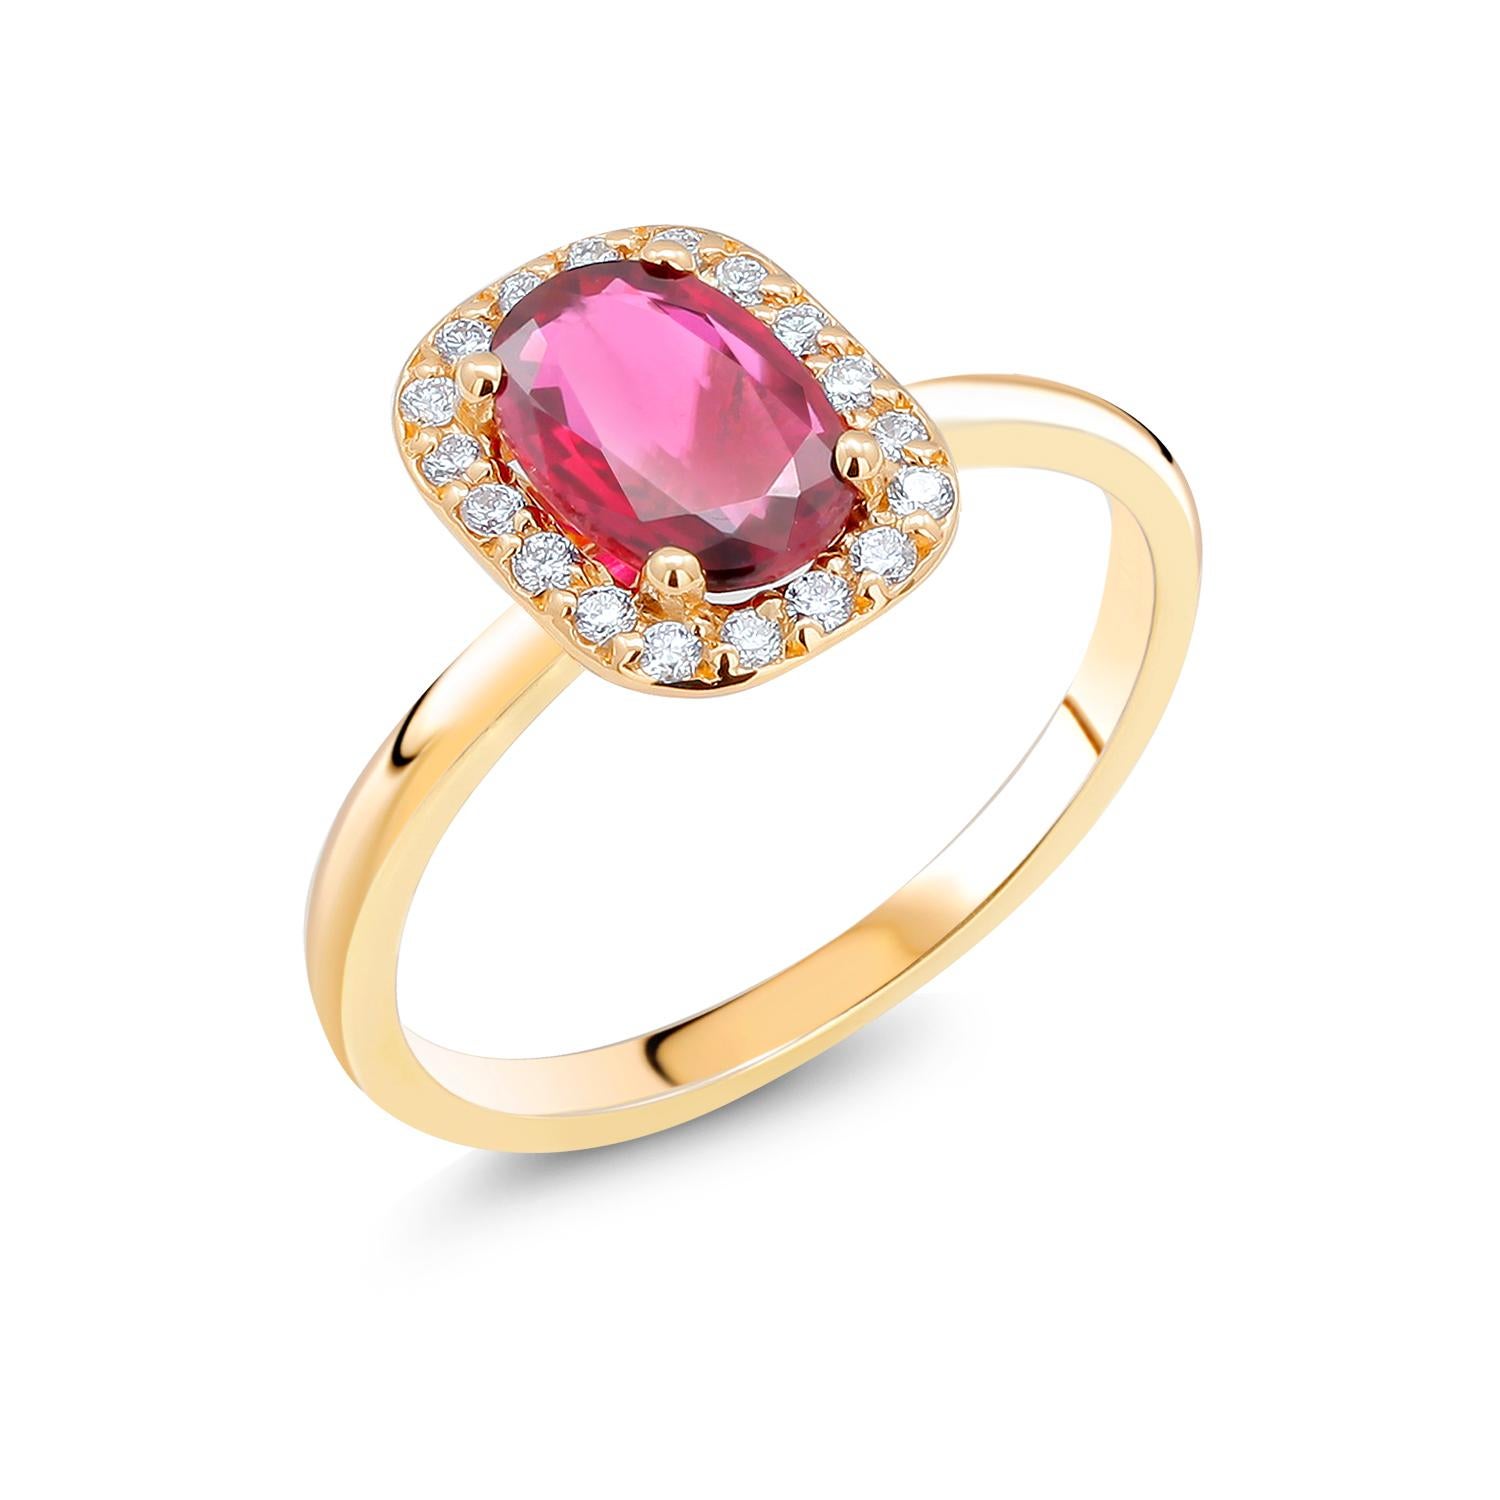 Antique Cushion Cut Cushion Shaped Ruby and Diamonds Set in 18 Karat Yellow Gold Cocktail Ring